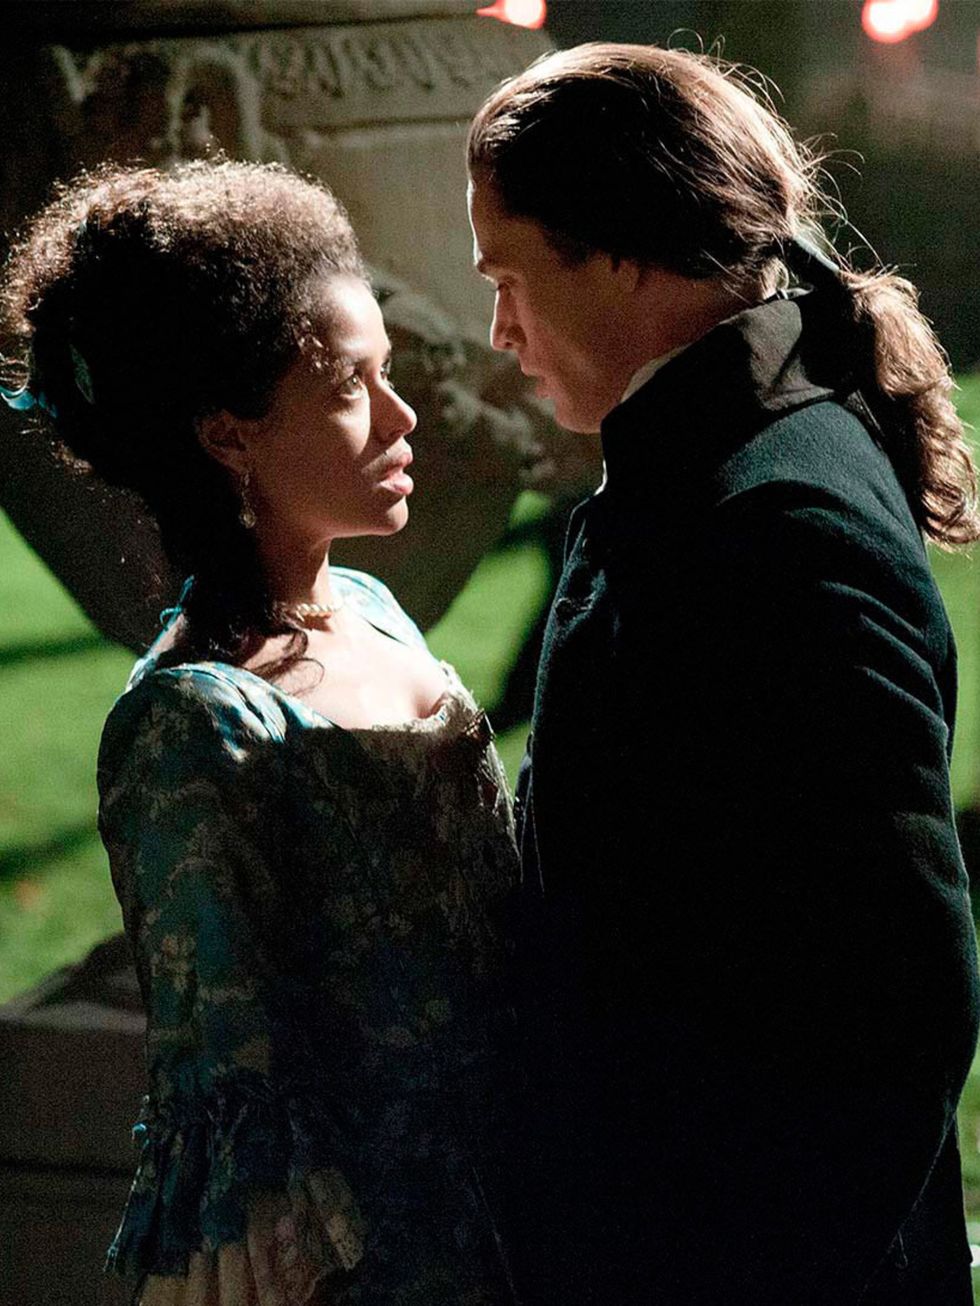 &lt;p&gt;&lt;strong&gt;FILM: Belle&lt;/strong&gt;&lt;/p&gt;&lt;p&gt;The latest anticipated period drama&lt;em&gt;, Belle,&lt;/em&gt; is released in cinemas this week.&lt;/p&gt;&lt;p&gt;&lt;em&gt;Belle&lt;/em&gt; is the tale of an illegitimate mixed-race d